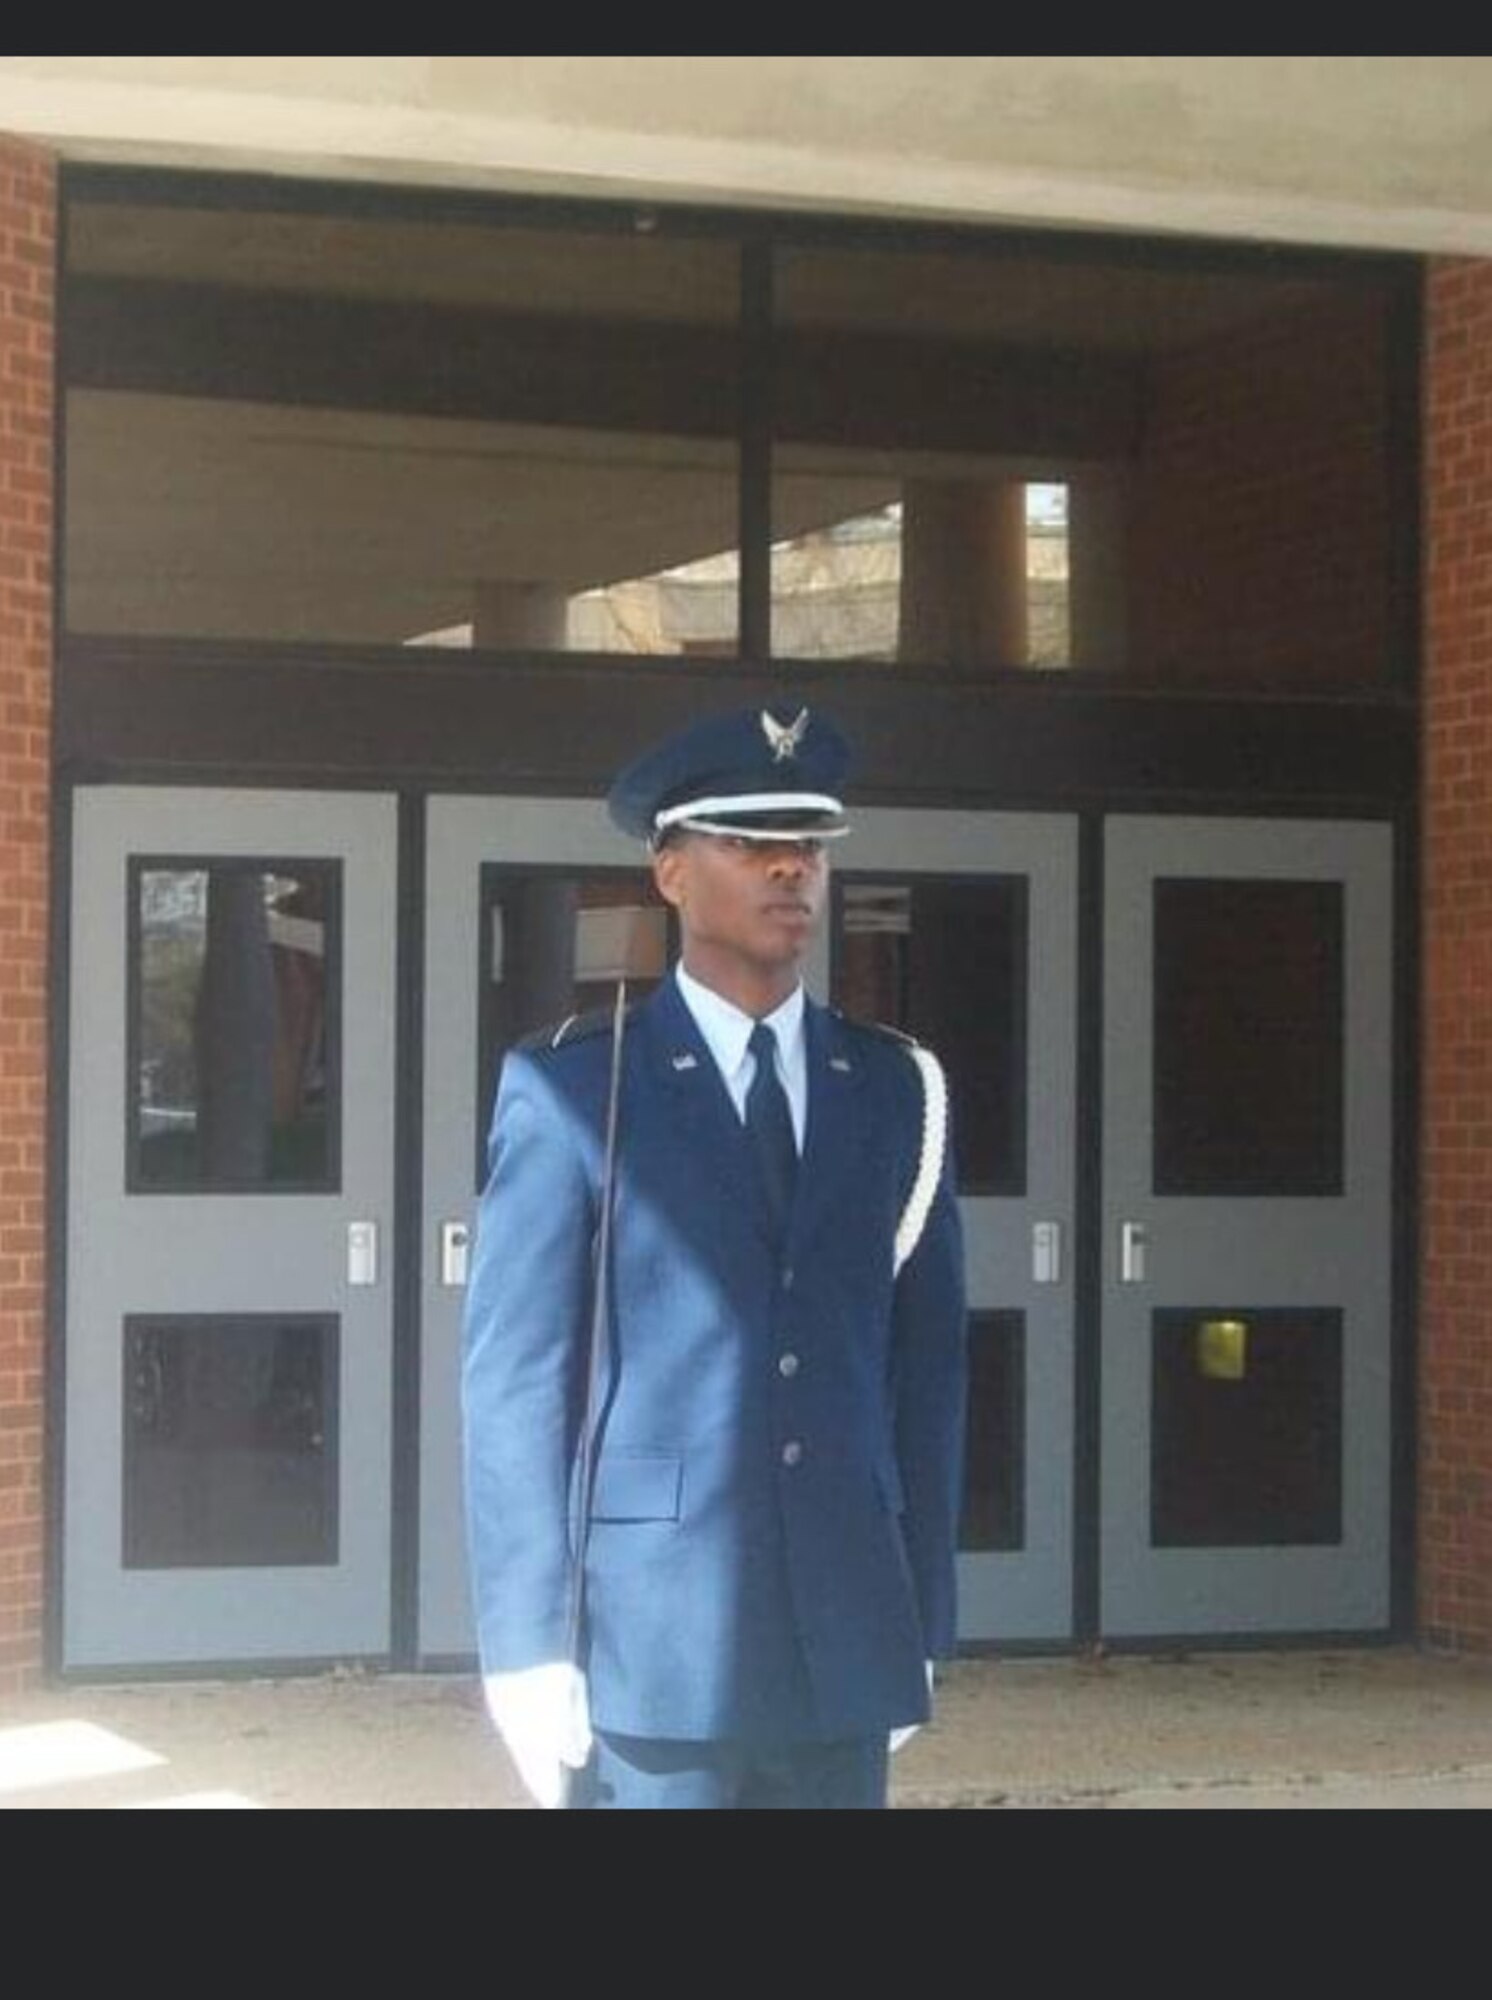 U.S. Air Force Maj. Gabriel Byrd stands at attention at Tuskegee University.